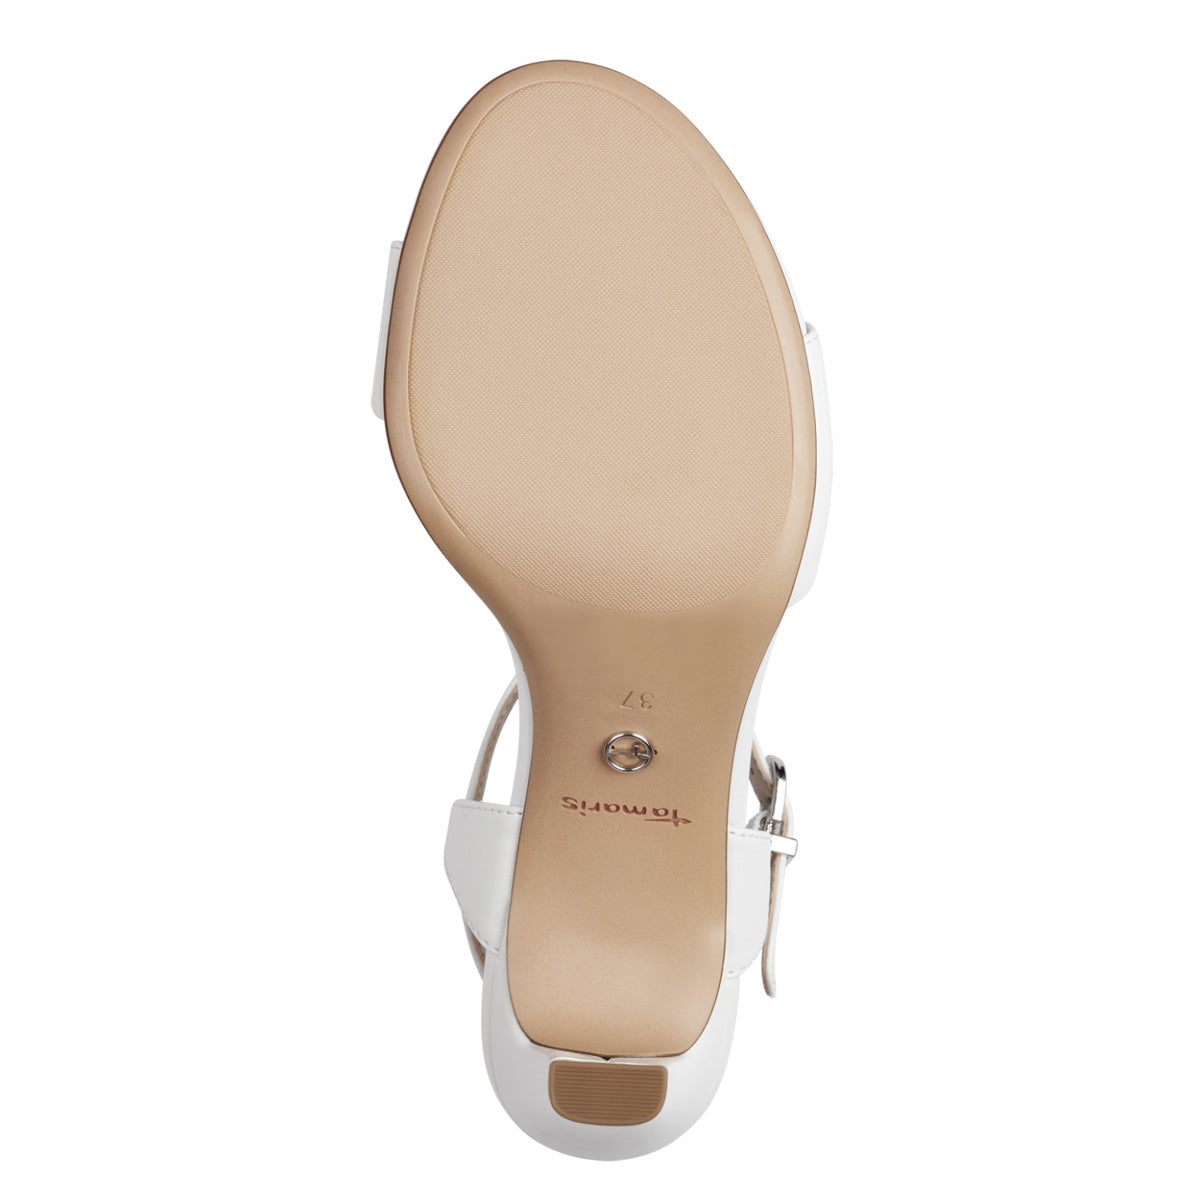  Angle view focusing on the TOUCH-IT technology footbed for maximum comfort in the Tamaris white sandal.